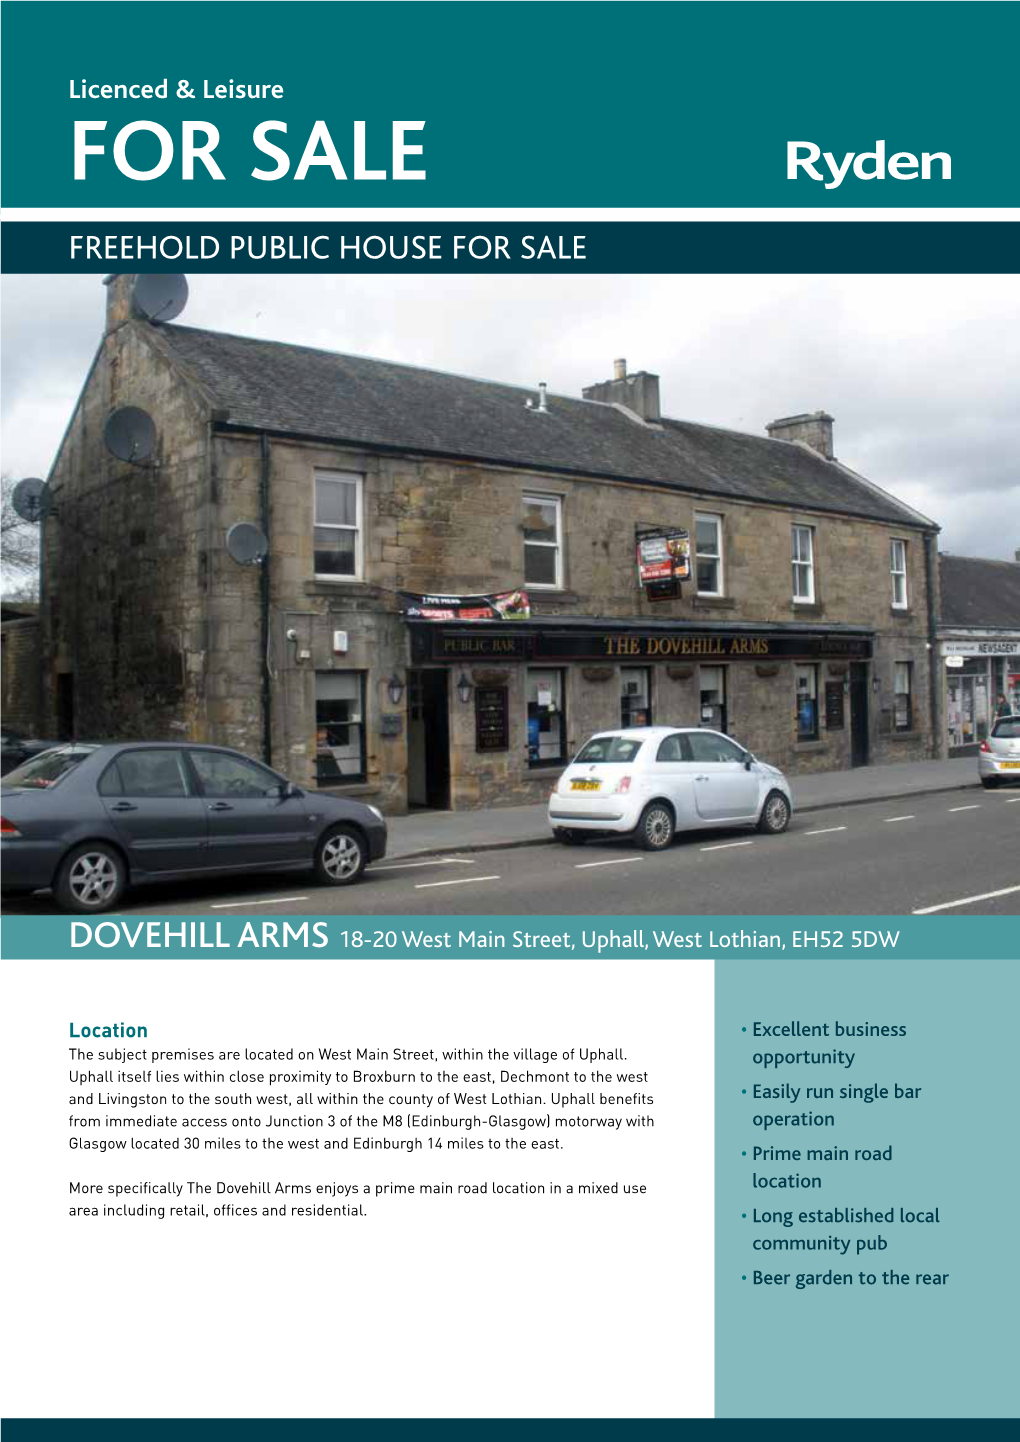 FOR SALE Freehold Public House for Sale